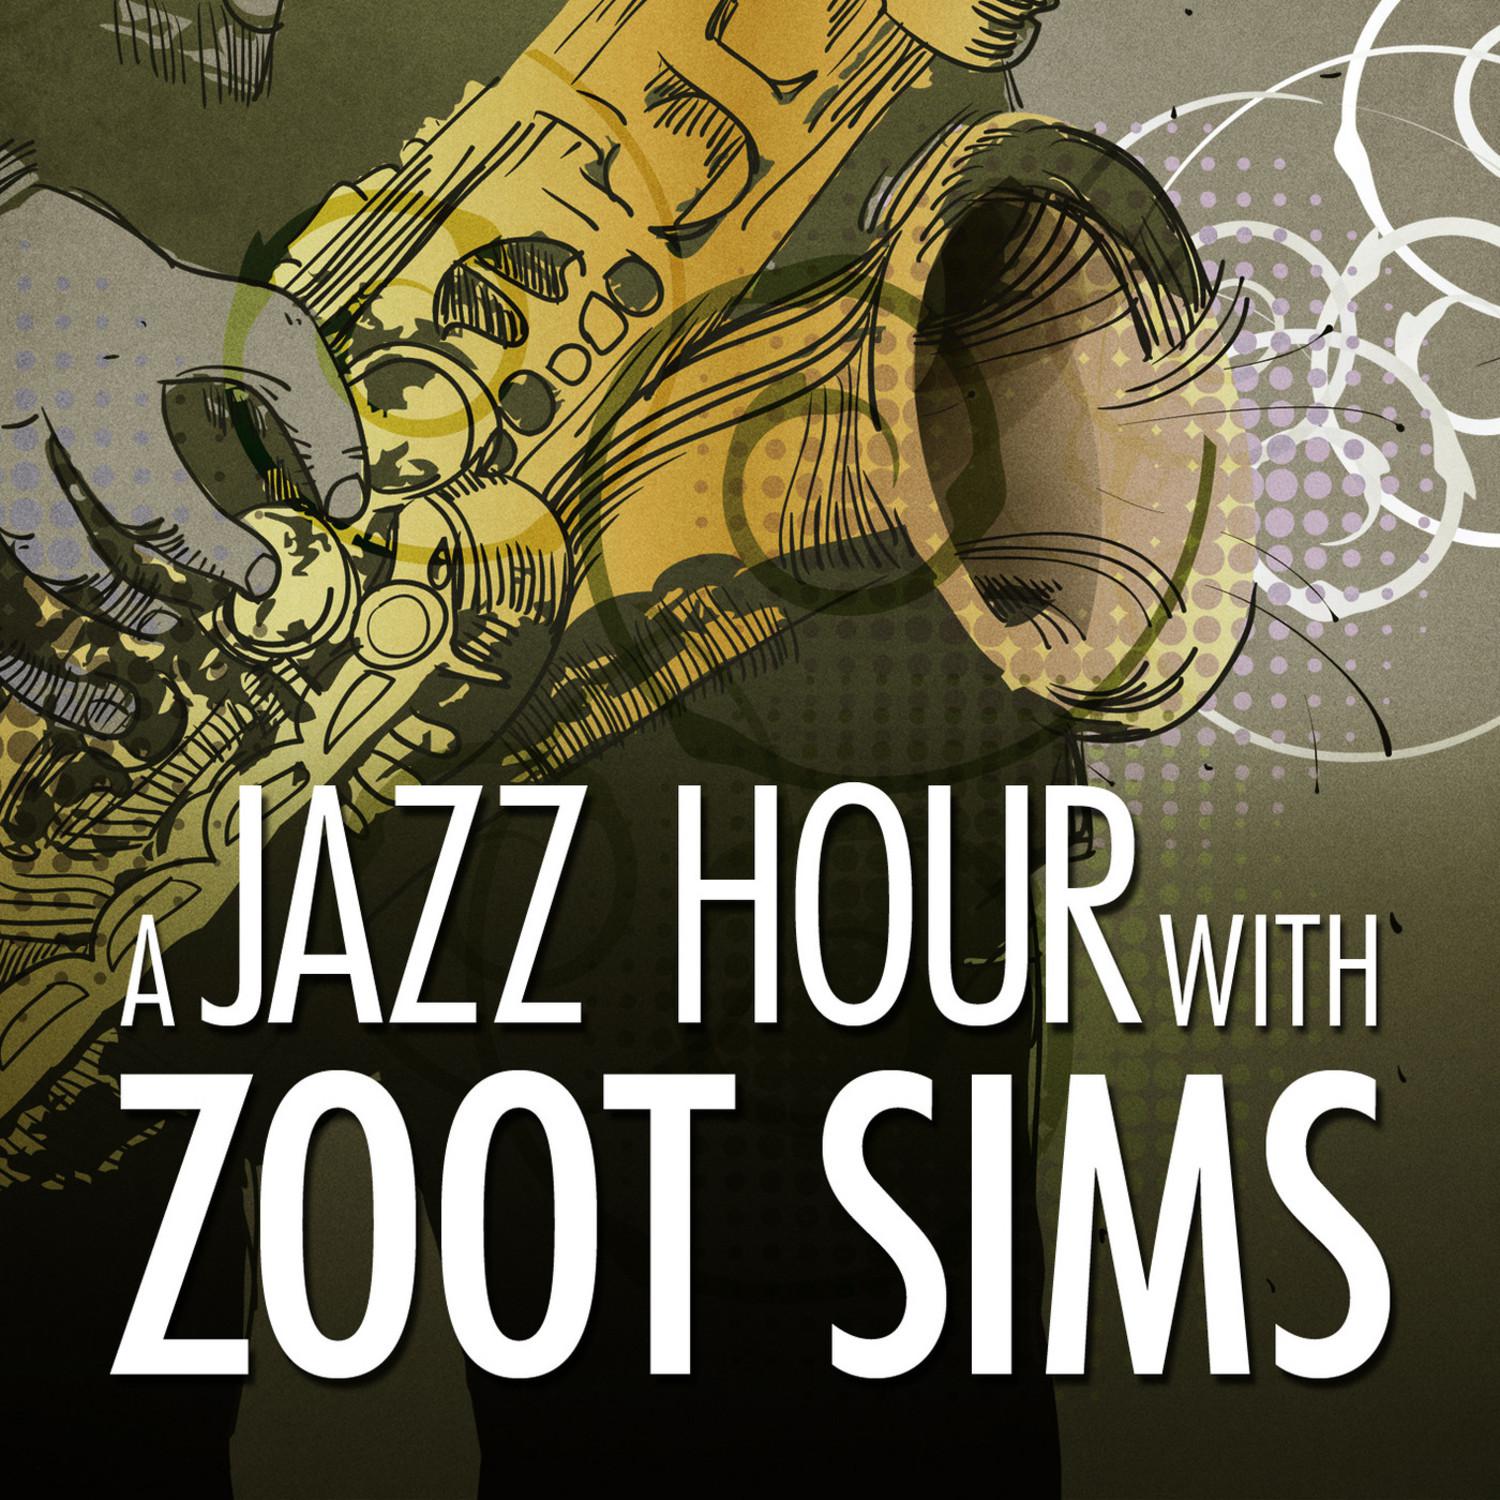 A Jazz Hour With Zoot Sims